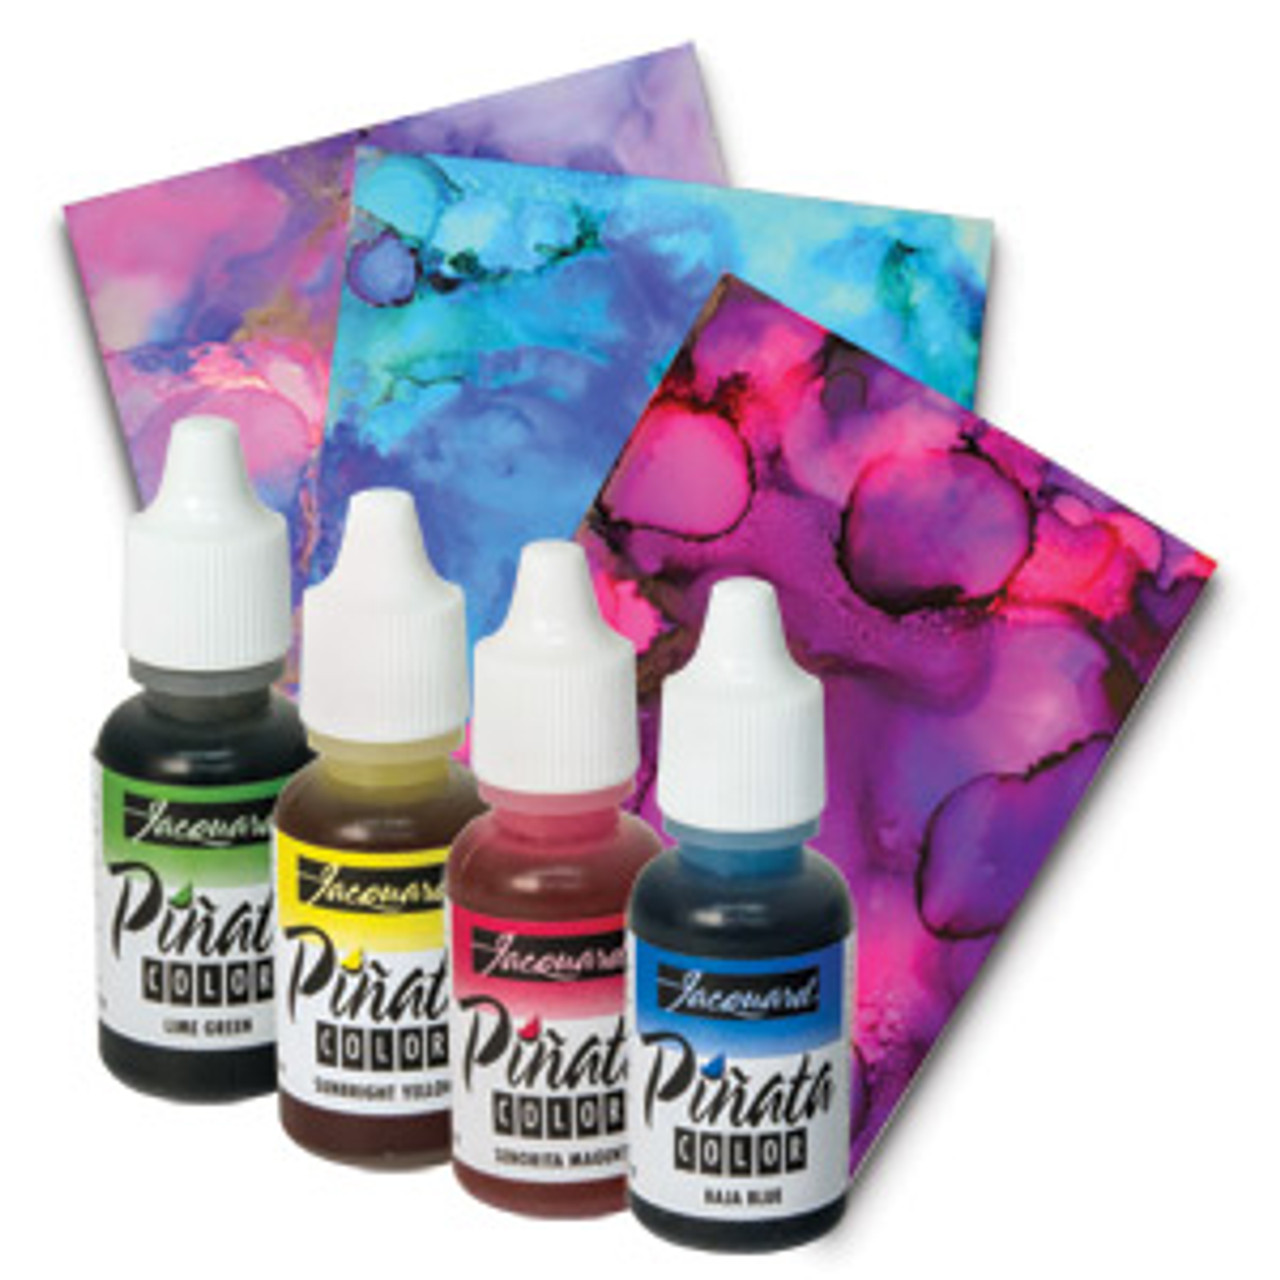 Pinata Alcohol Inks - Fine Wooden Creations